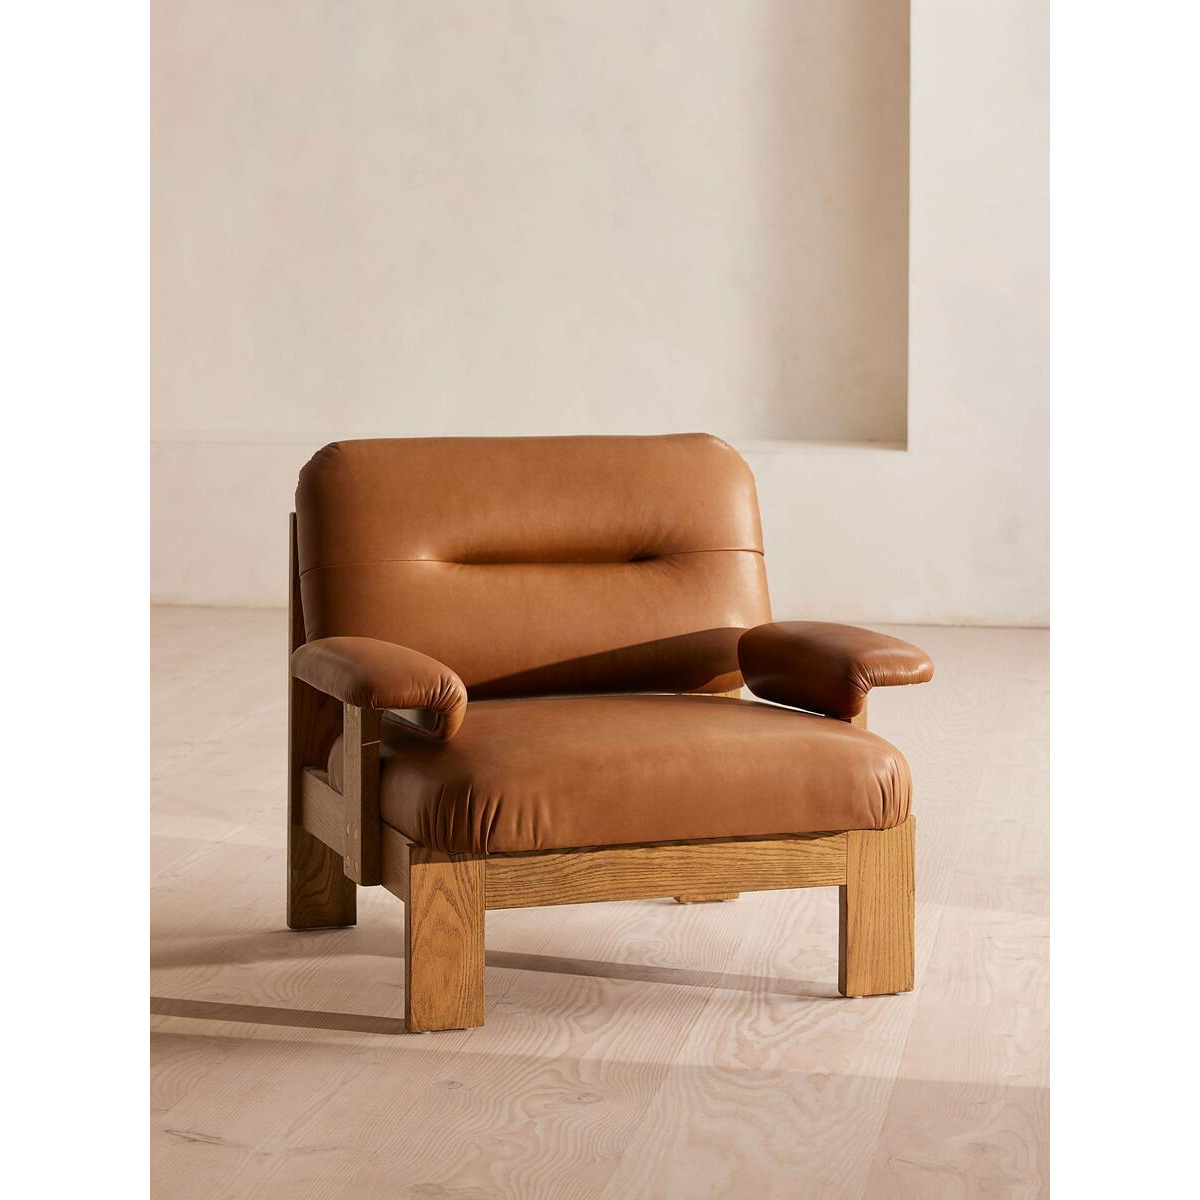 Horton Armchair in Chestnut Leather | Retro Style Chair | White City House